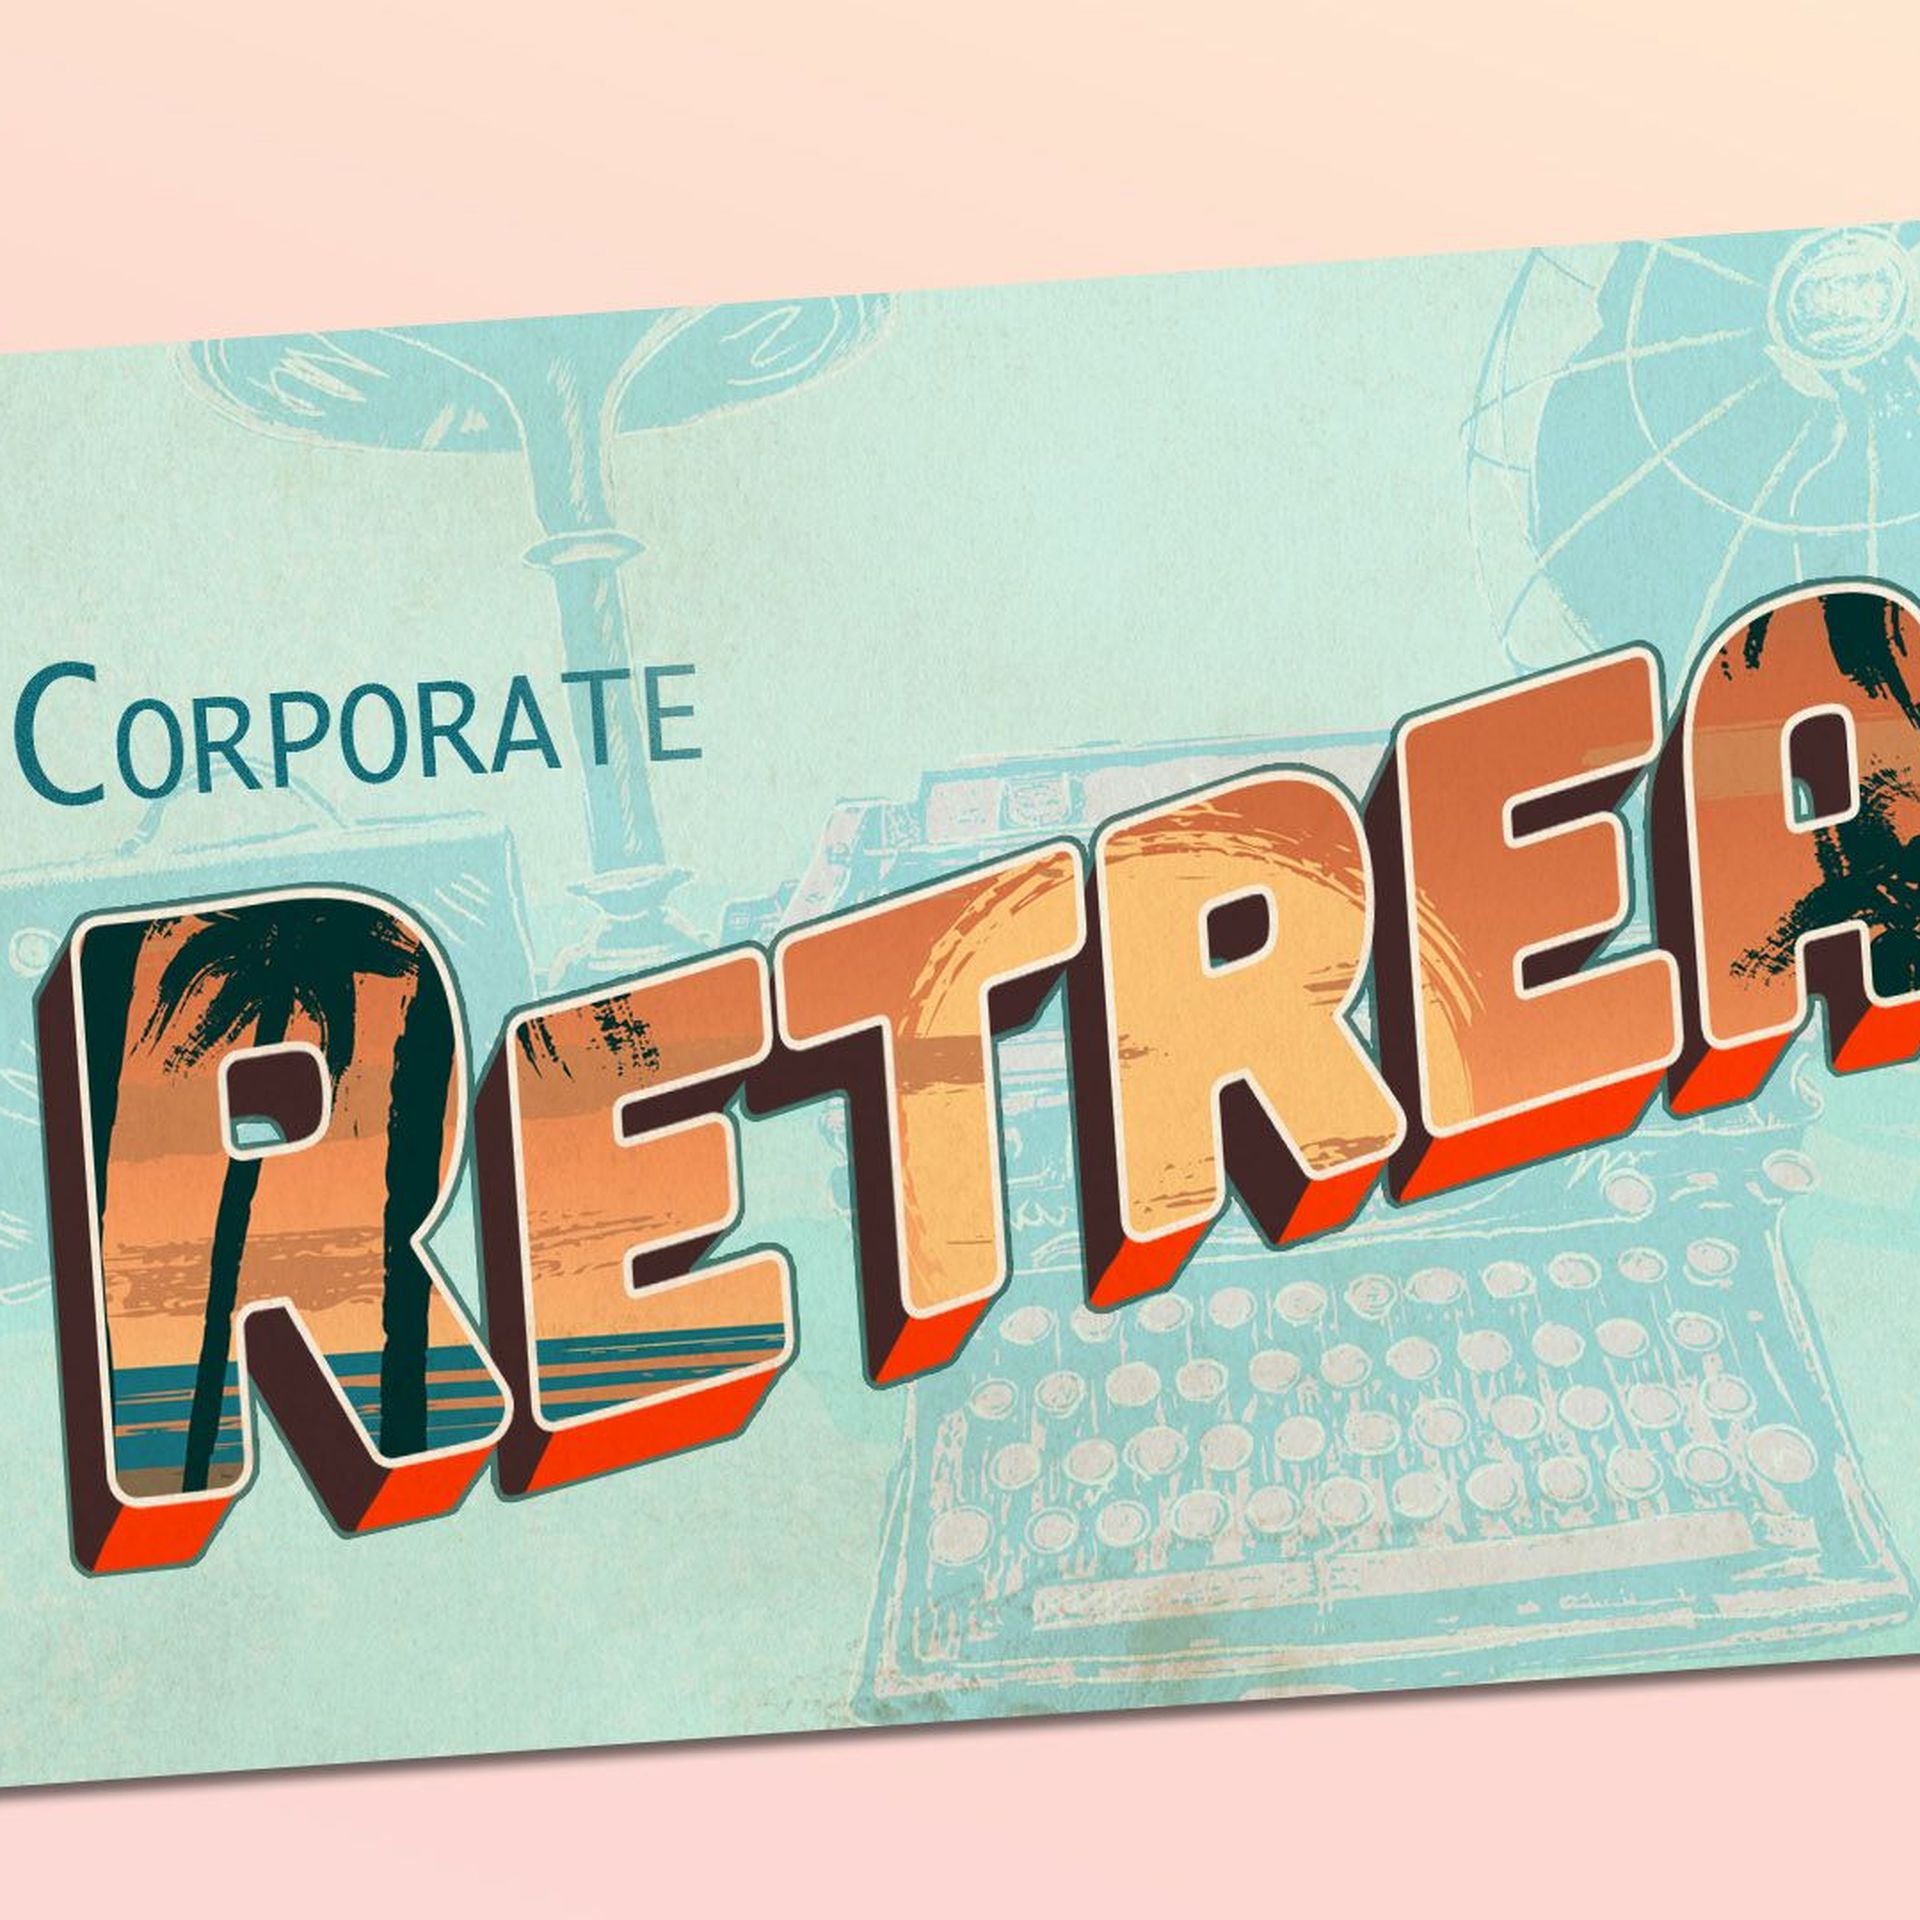 Illustration of a vintage postcard that reads "corporate retreat"